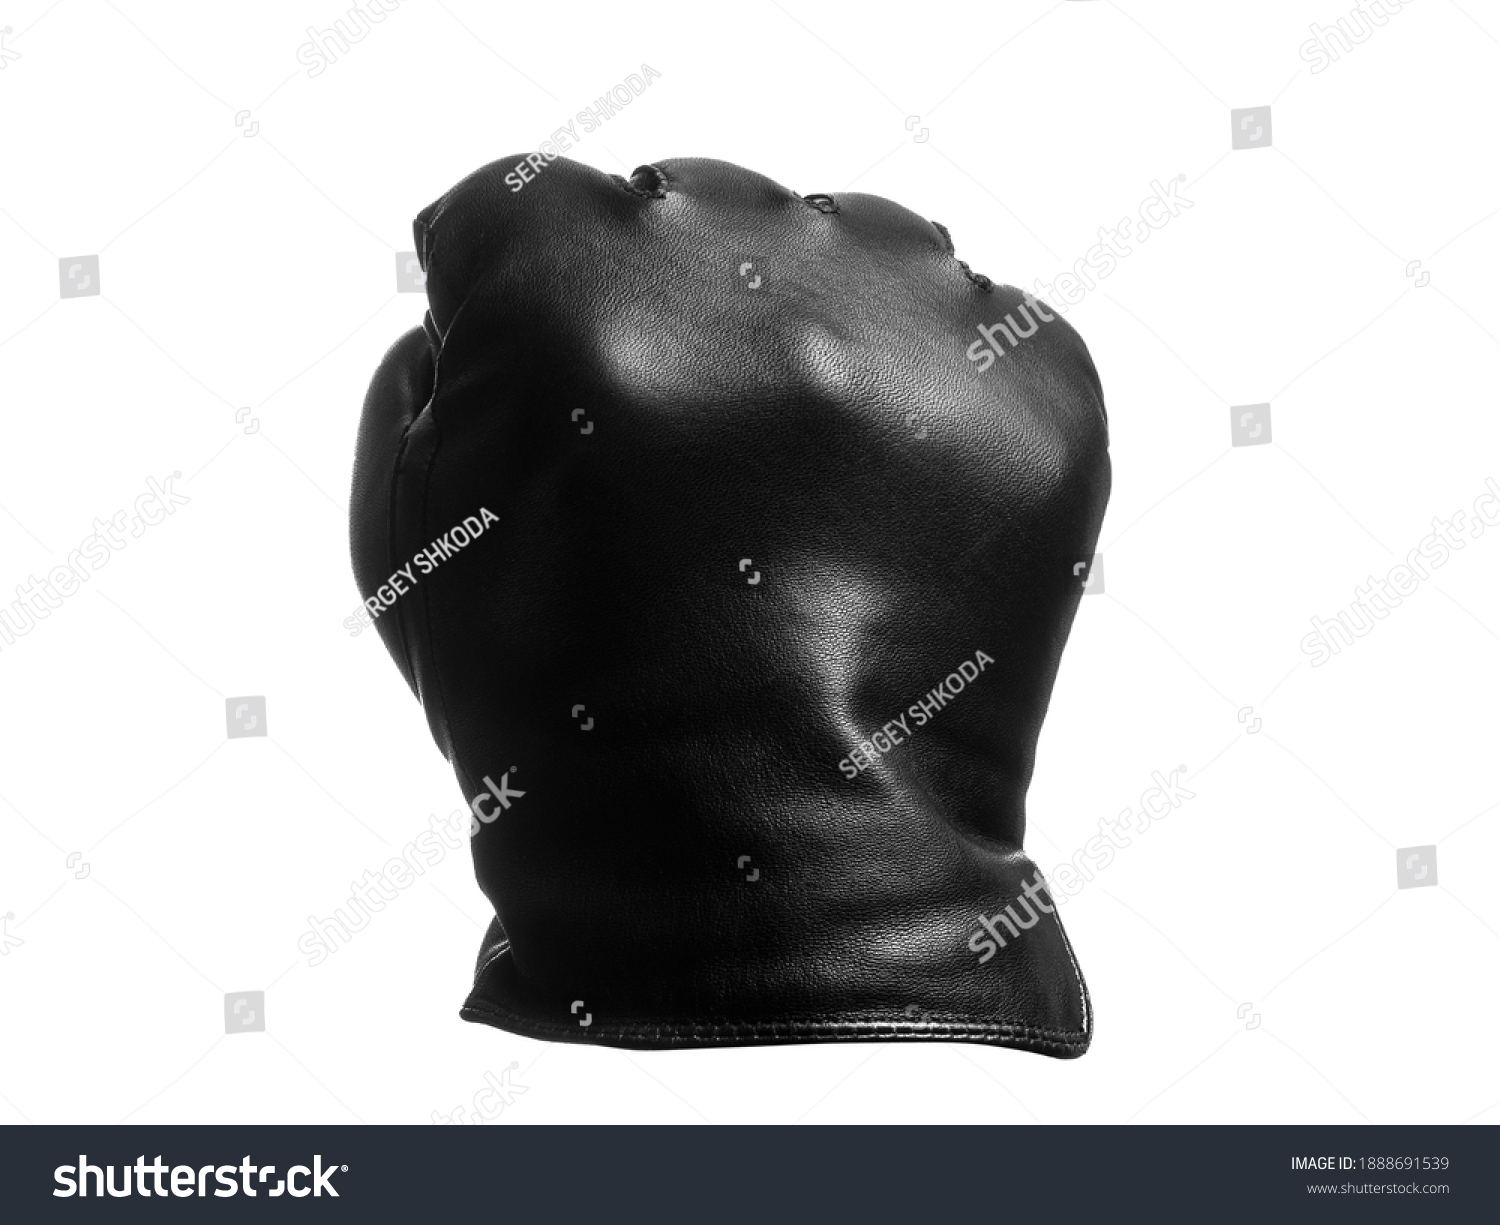 black leather glove shows clenched fist up out gesture. isolated white background. #1888691539